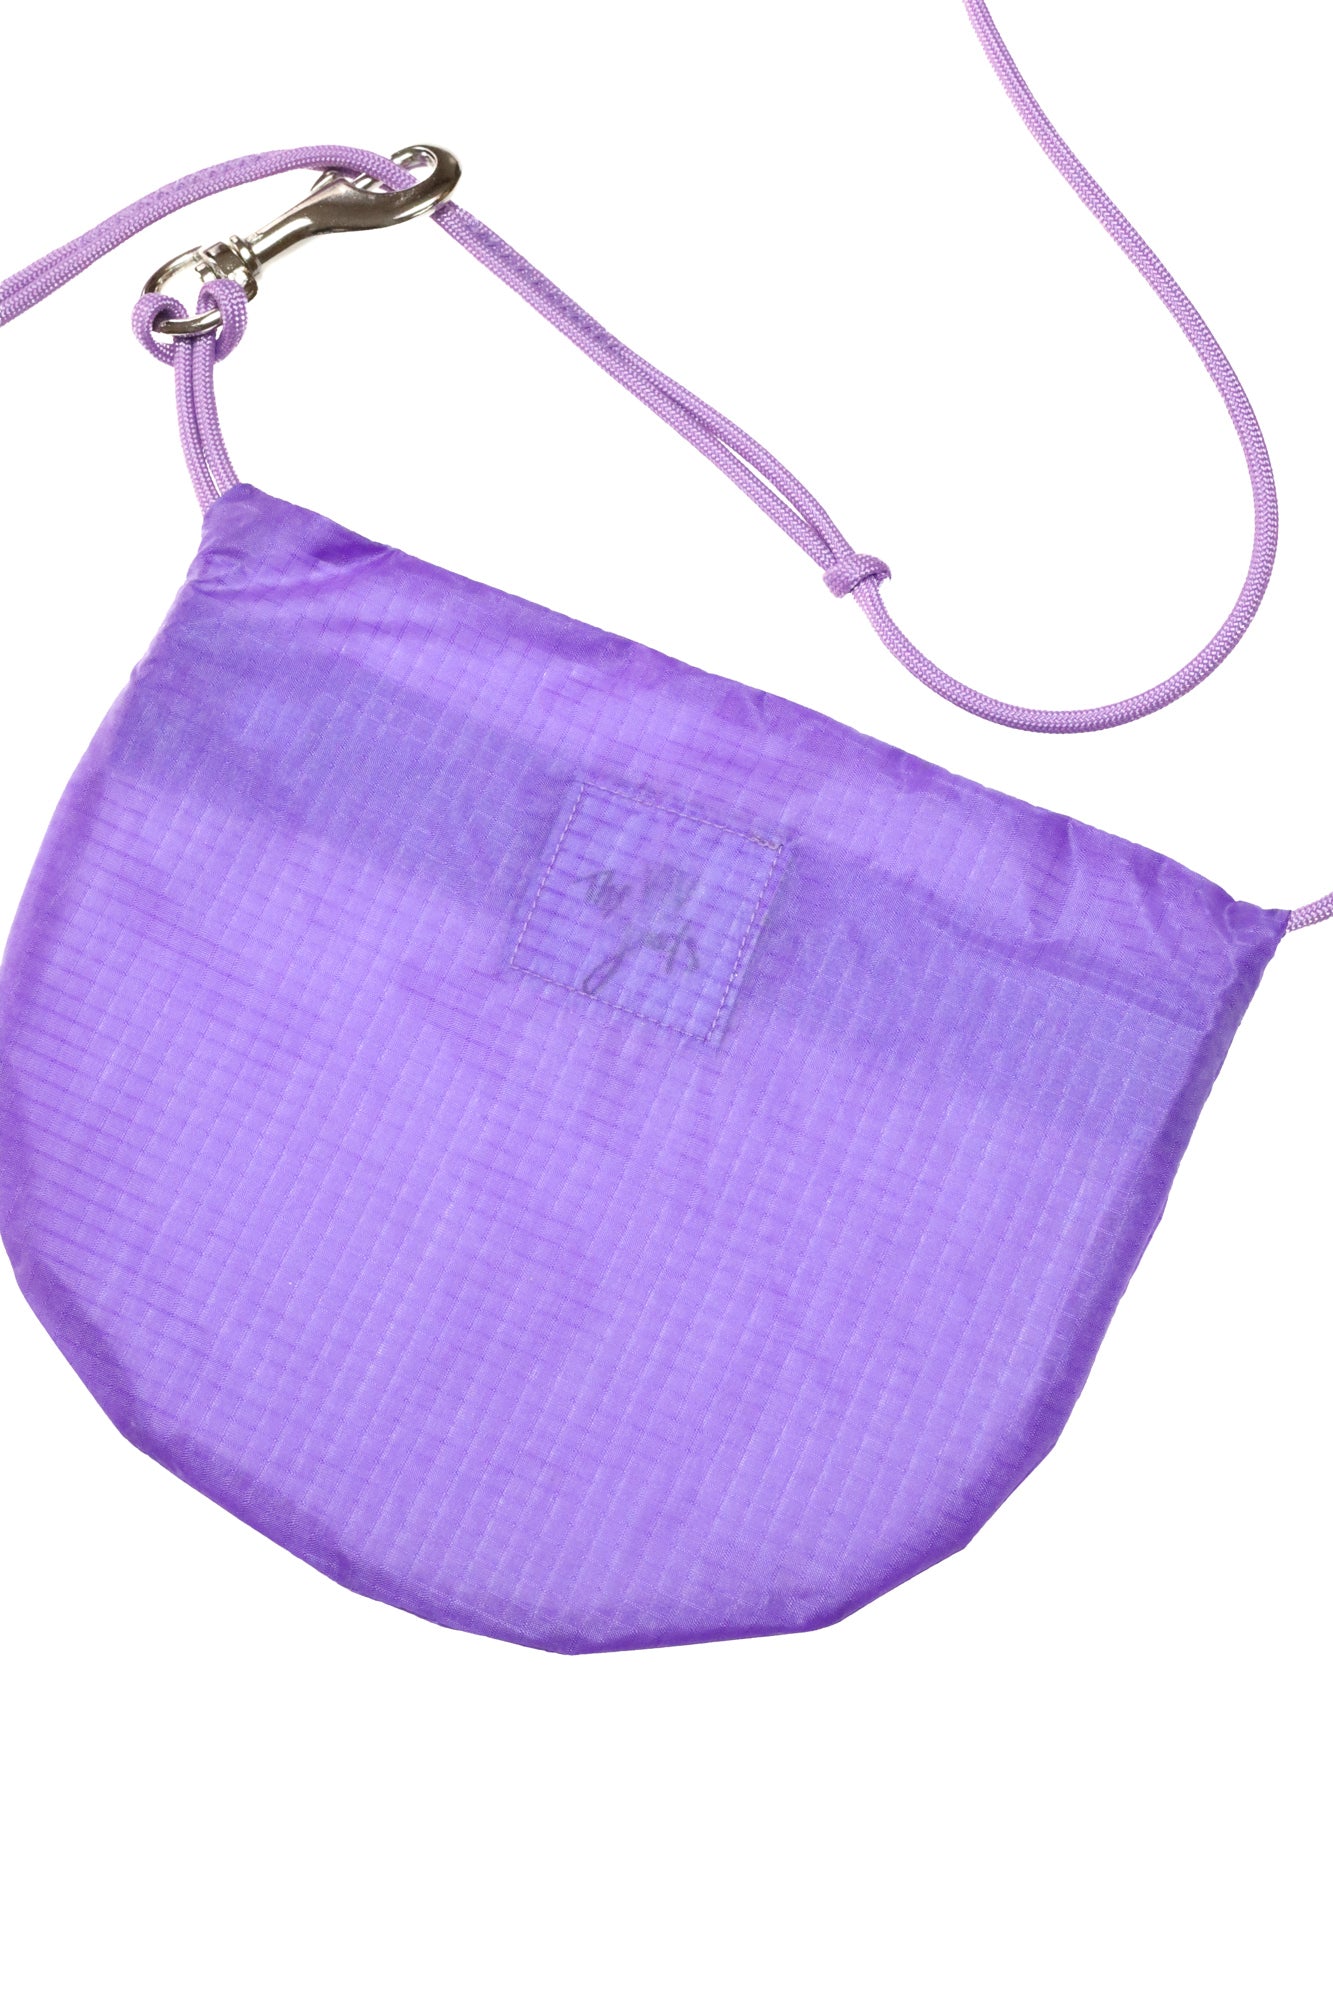 Flat lay crossbody bag in lavender made from recycled rip stop nylon